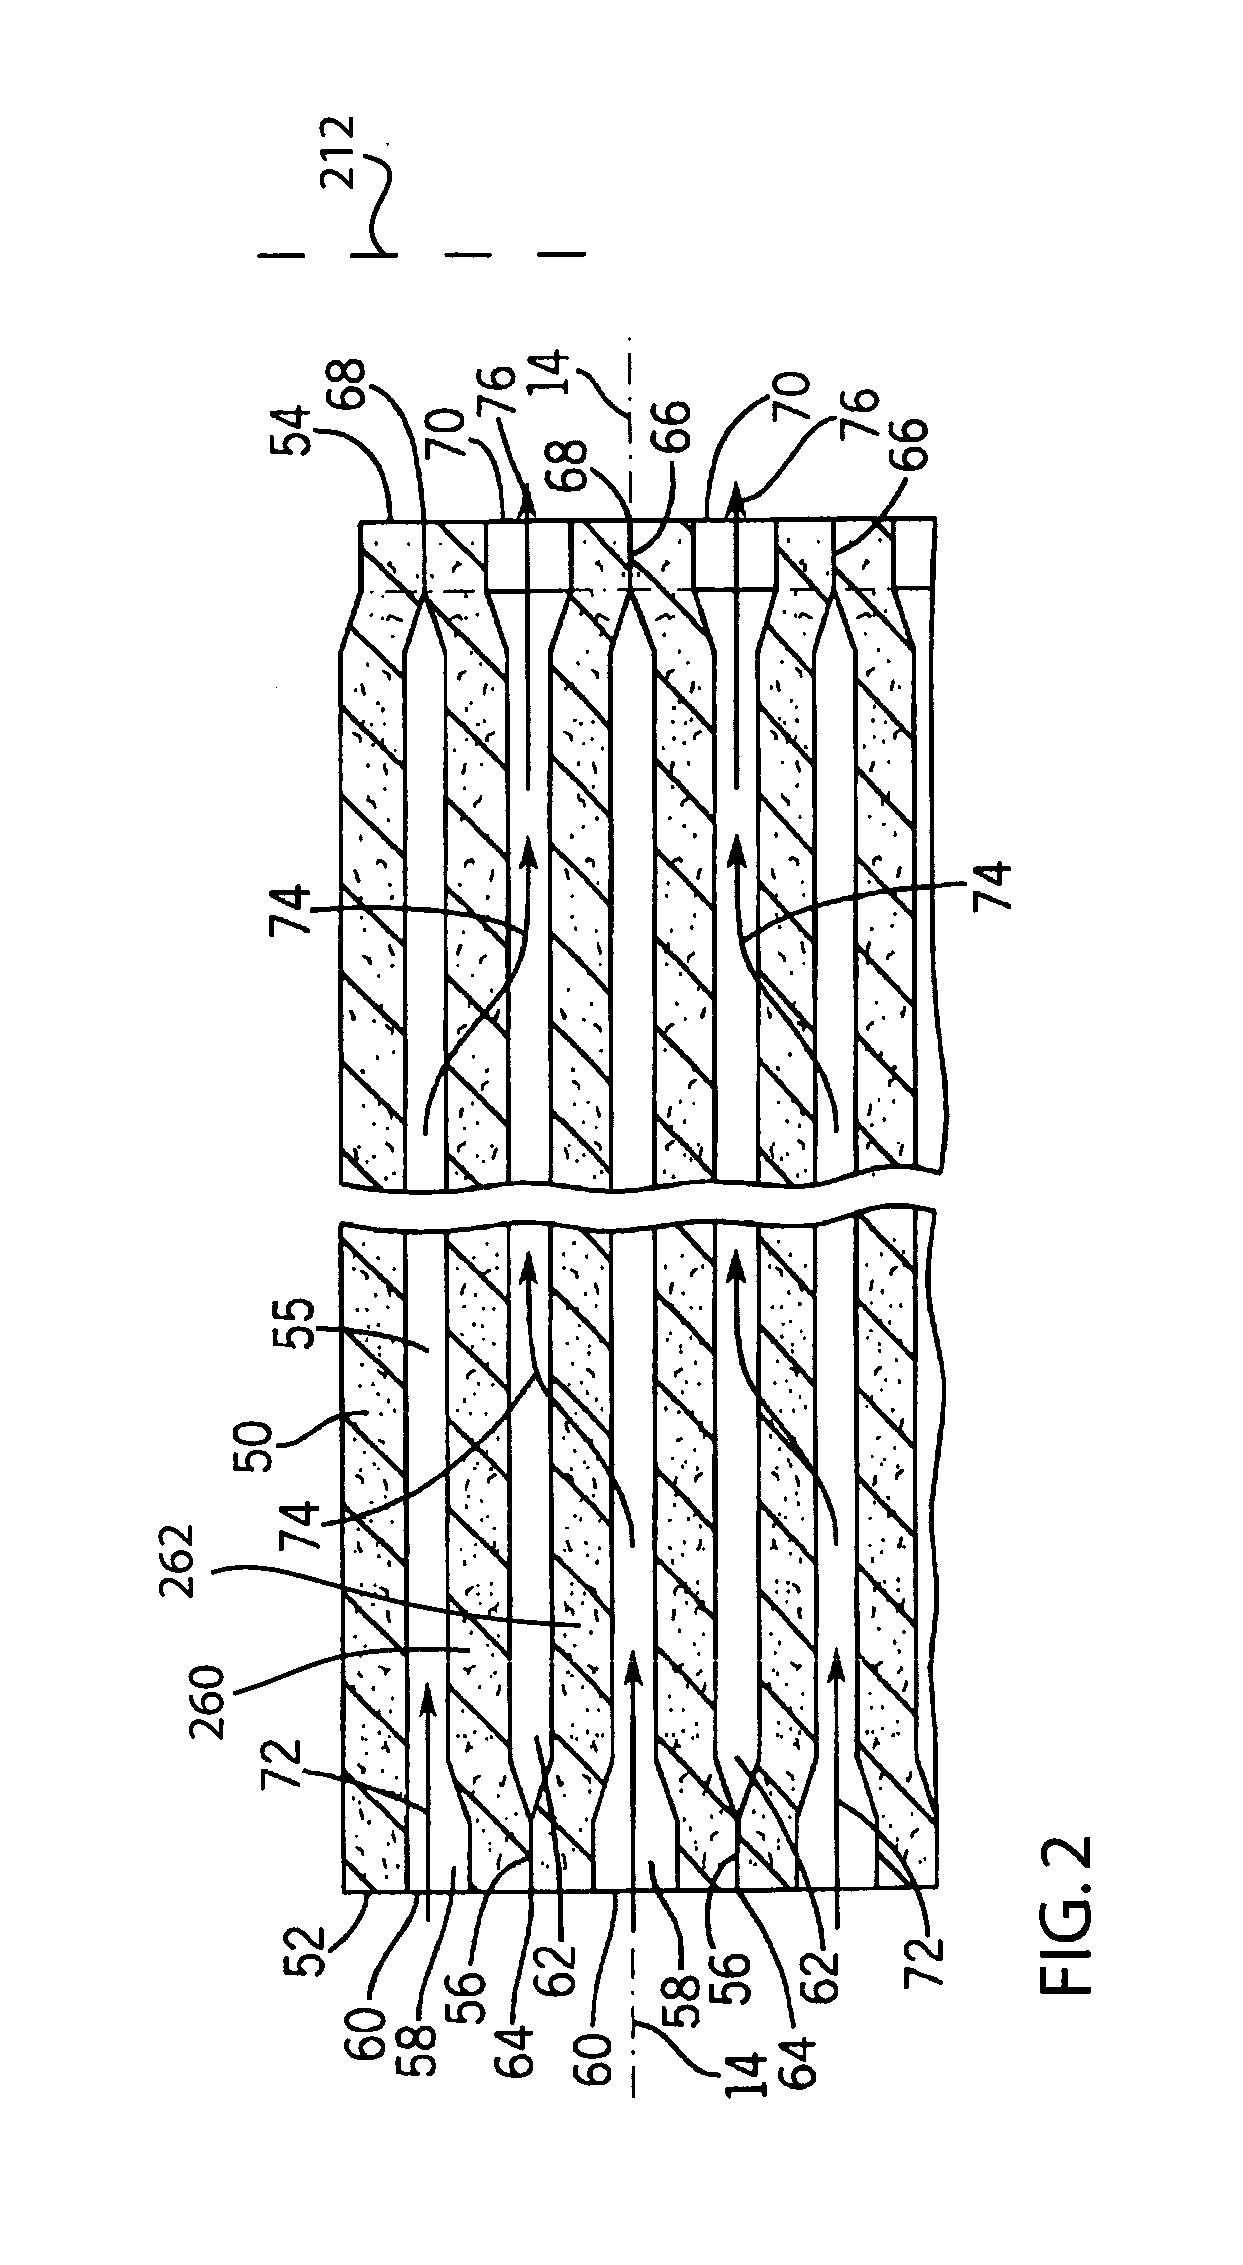 Direct flow filter with sealing mechanism